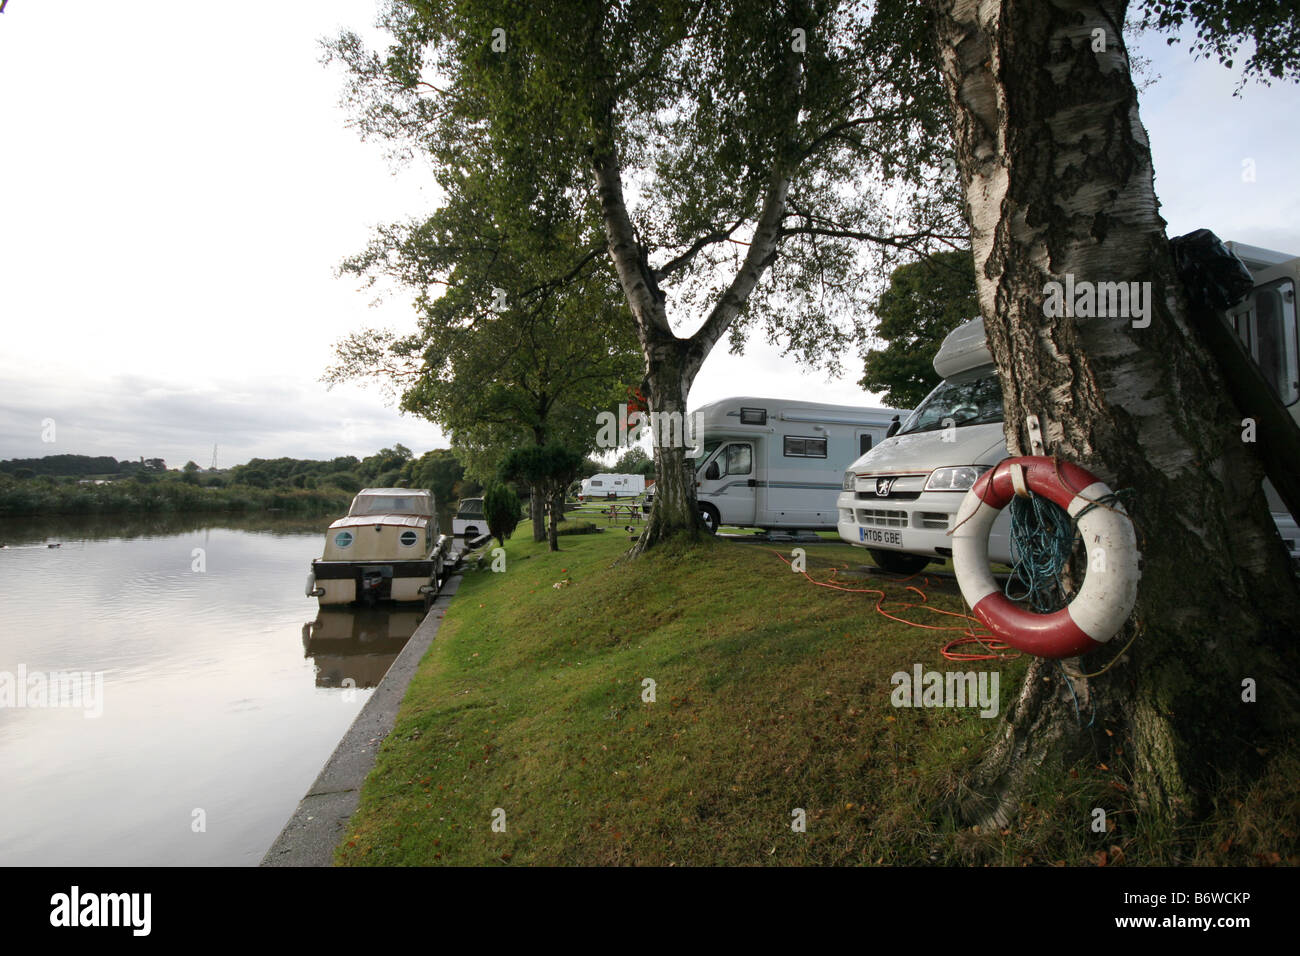 Motorhomes camped by the River Weaver near Northwich Cheshire with scooters attached at the back enjoying the serenity Stock Photo